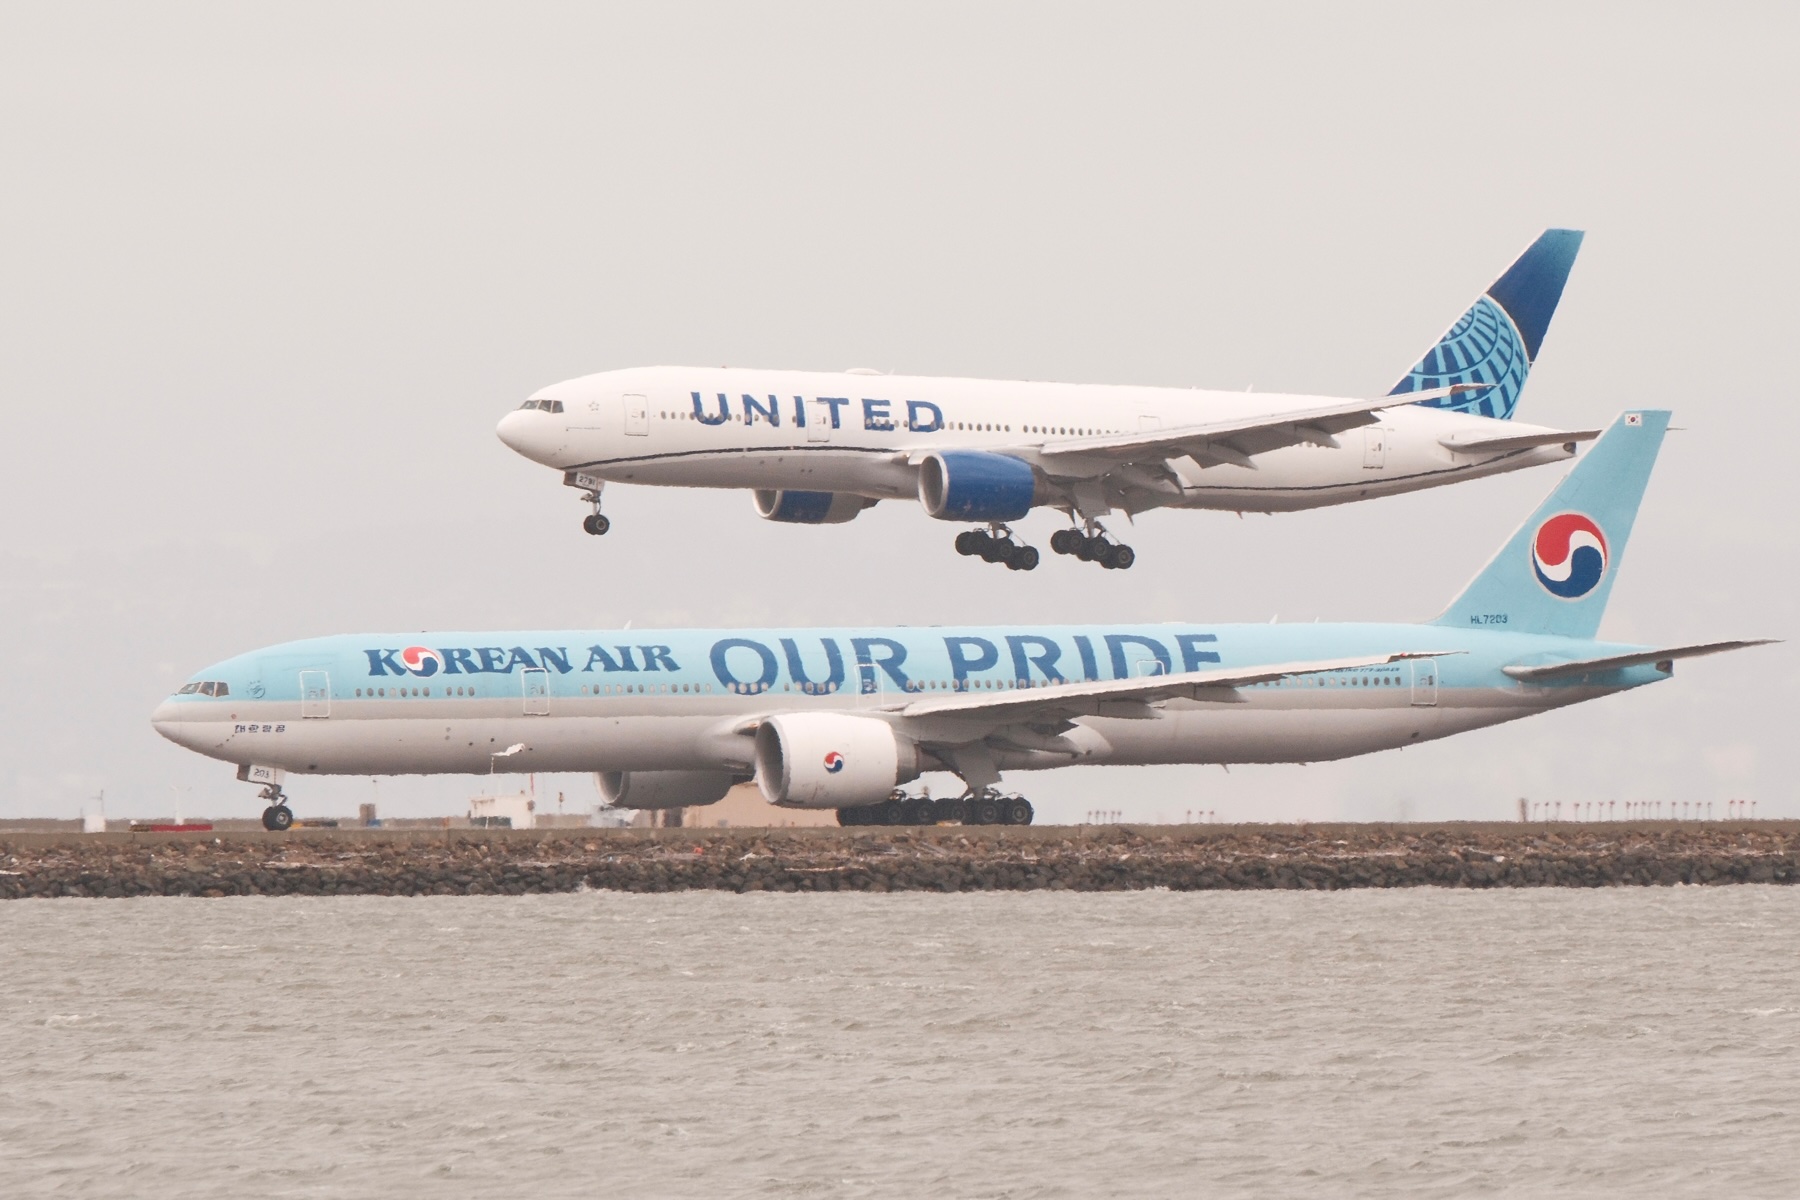 A Korean Airlines with Our Pride livery prepares for takeoff as another United 777 lands on an adjacent runway.